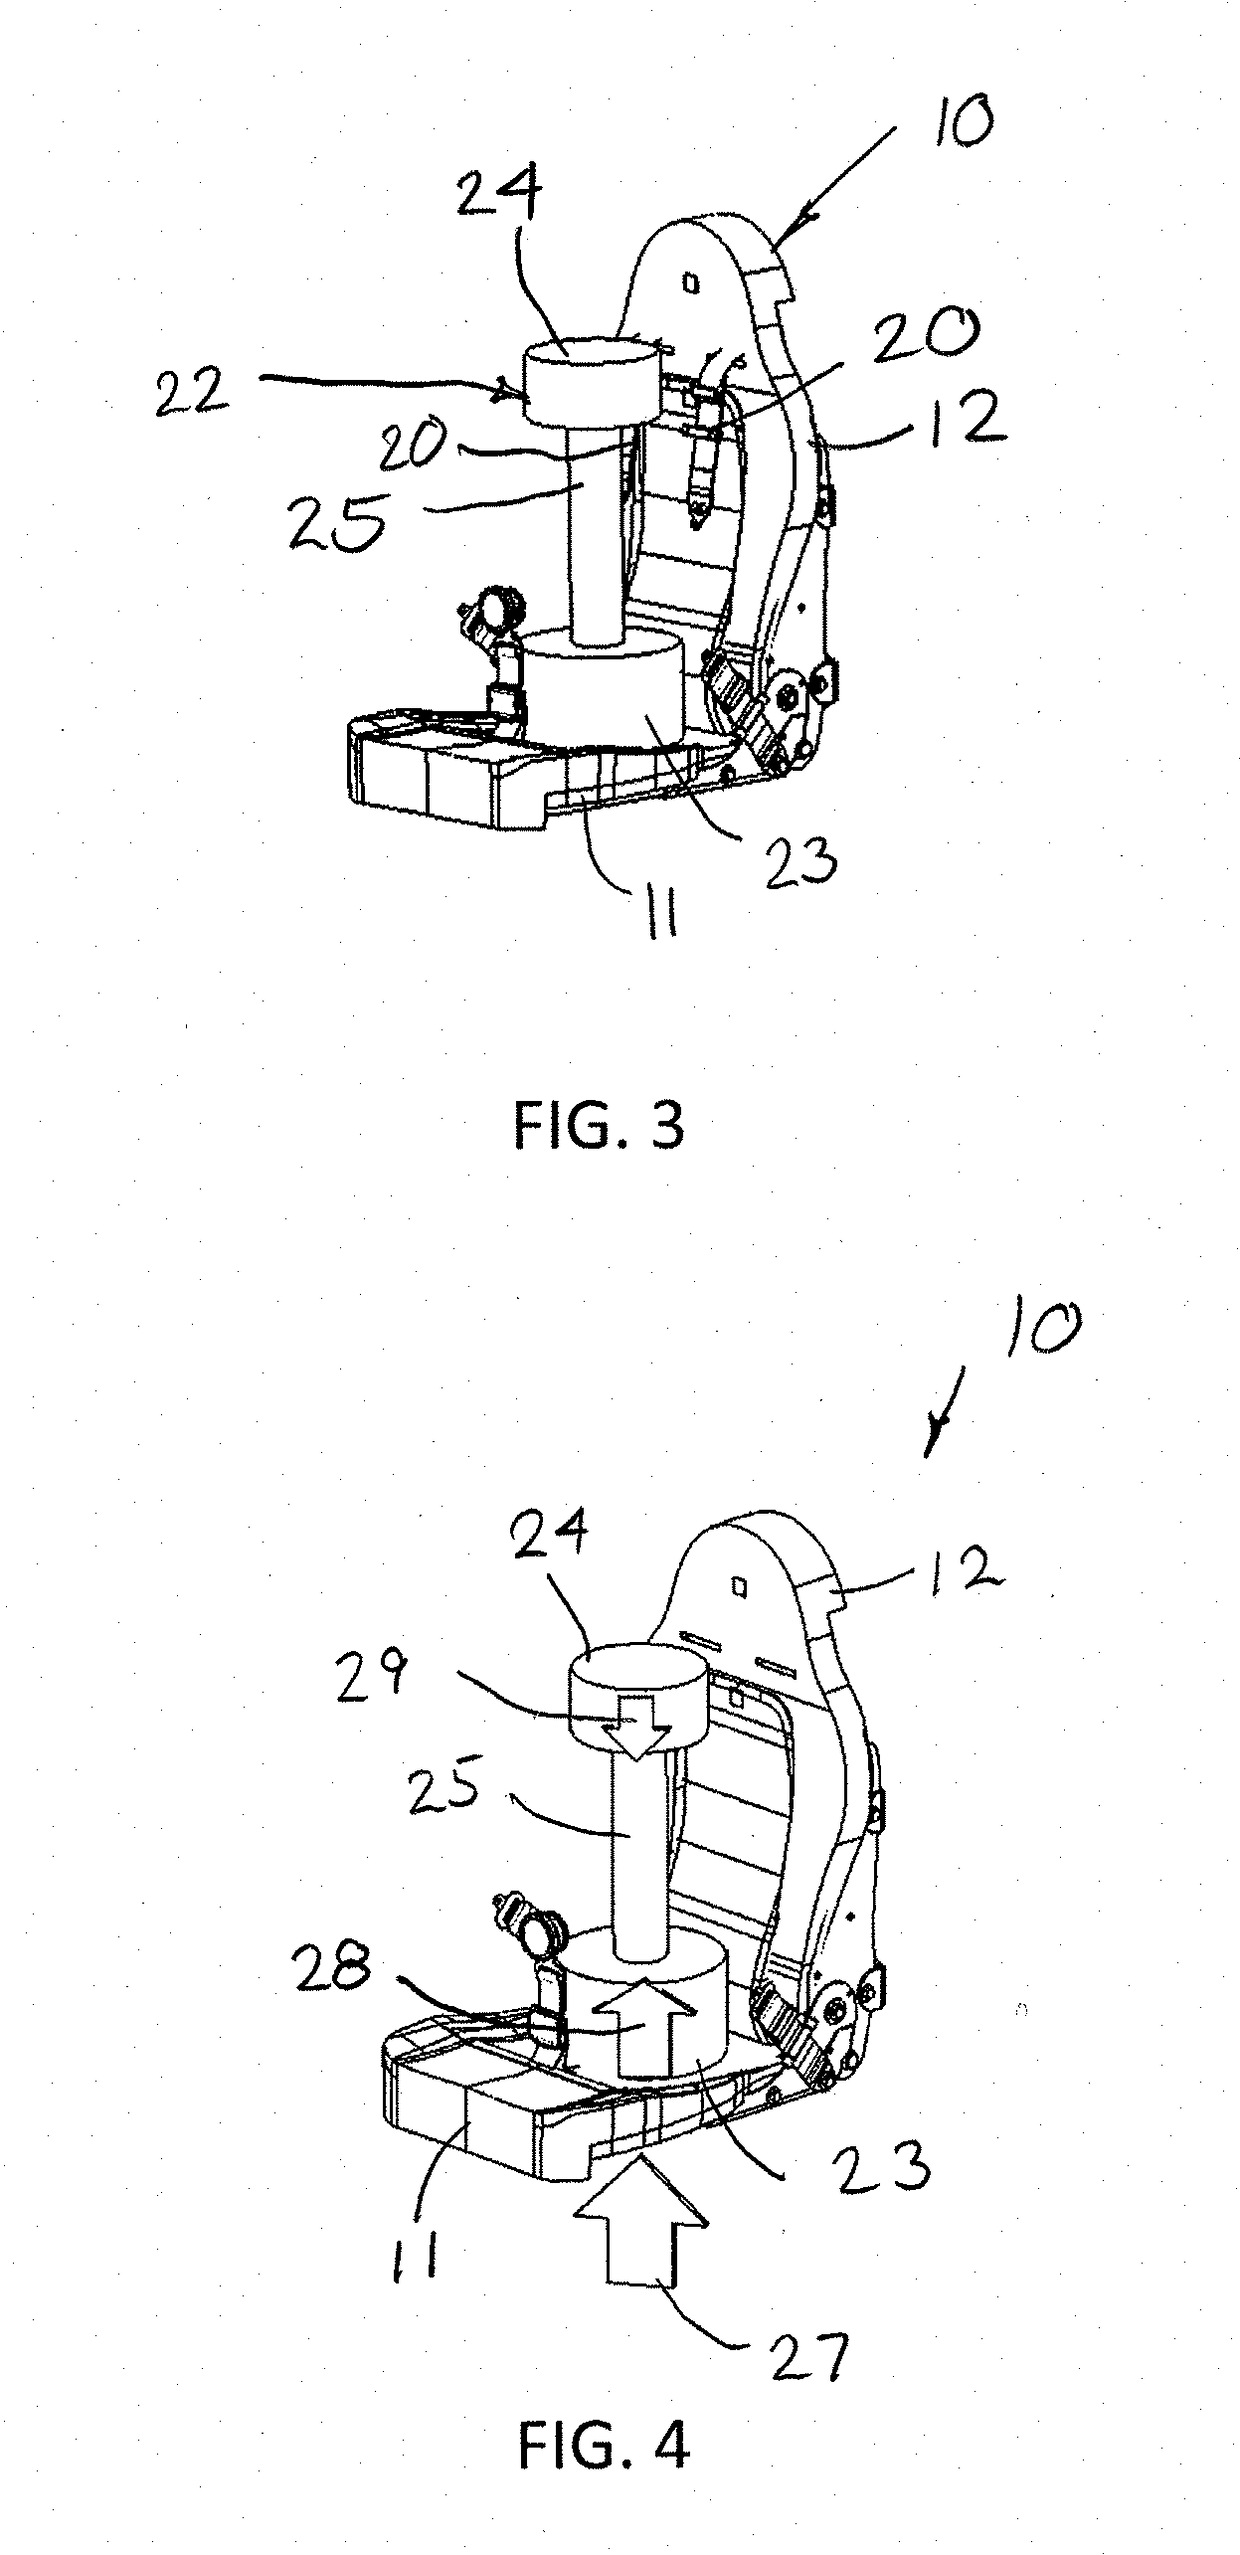 Torso Support System For Protecting Against Upward Accelerations In Vehicle Seats And Occupant Support Structures